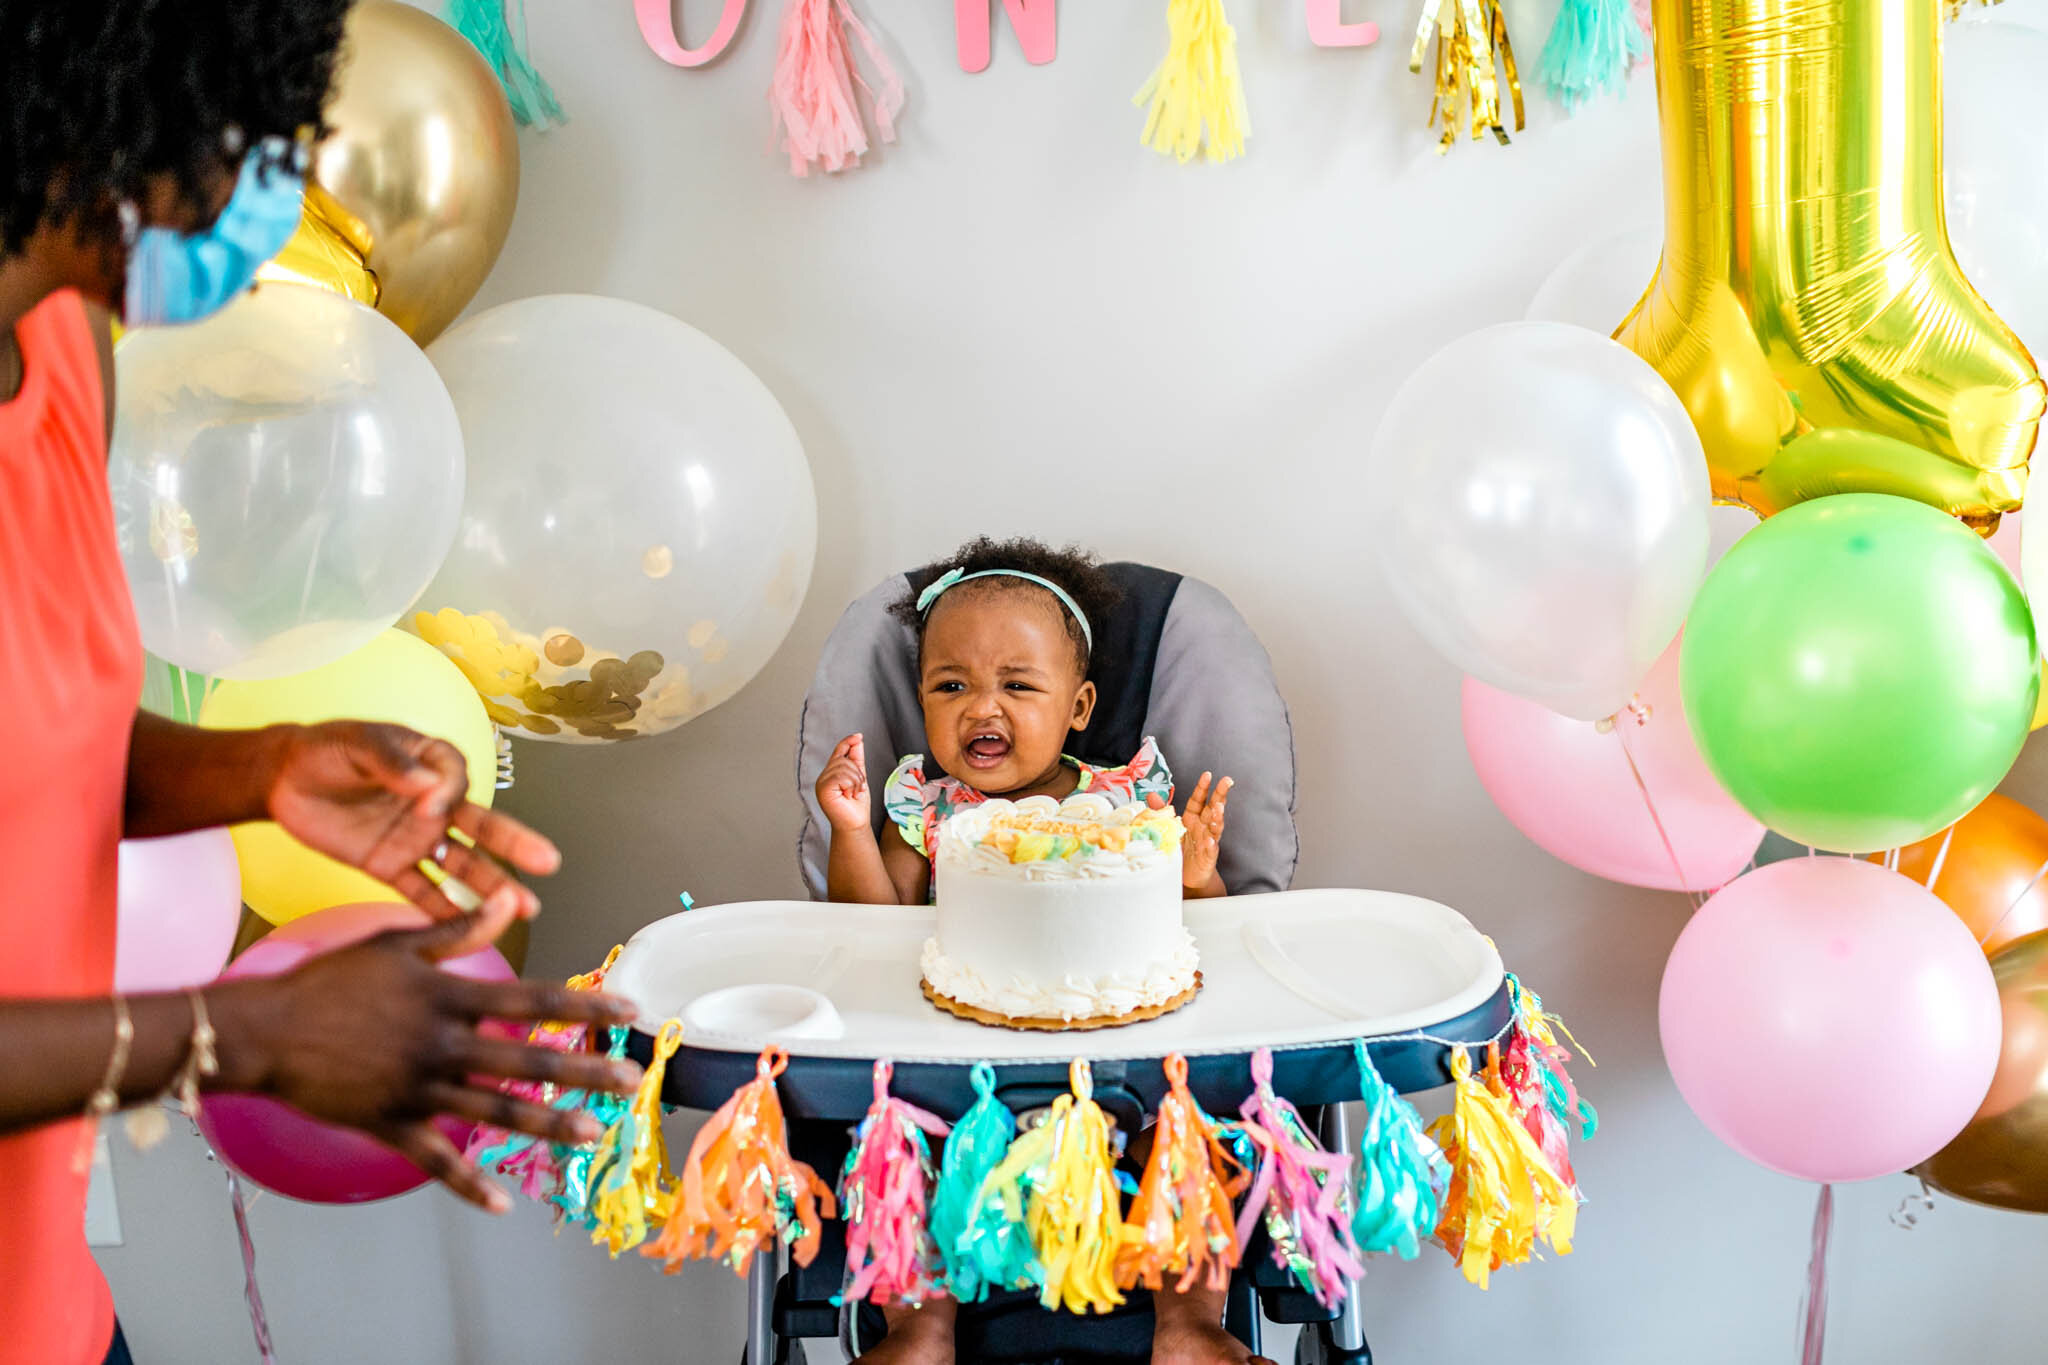 Durham Family Photographer | By G. Lin Photography | Baby girl unhappy with cake